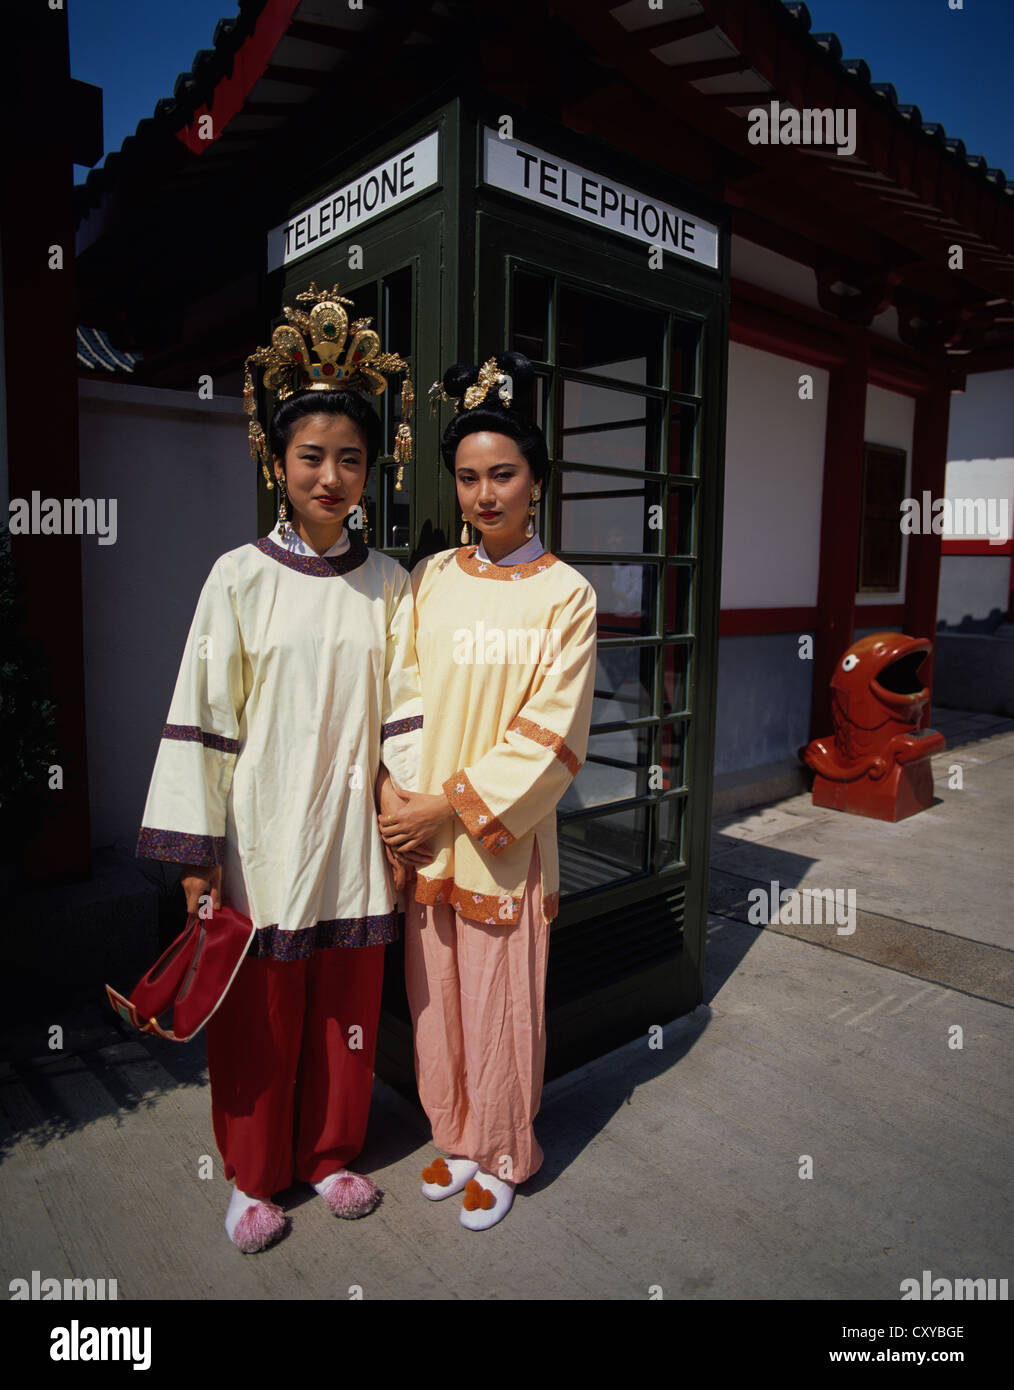 Hong Kong. Middle Kingdom. Two Chinese ladies in traditional Song Dynasty clothes. Posing by old English telephone booth in temp Stock Photo